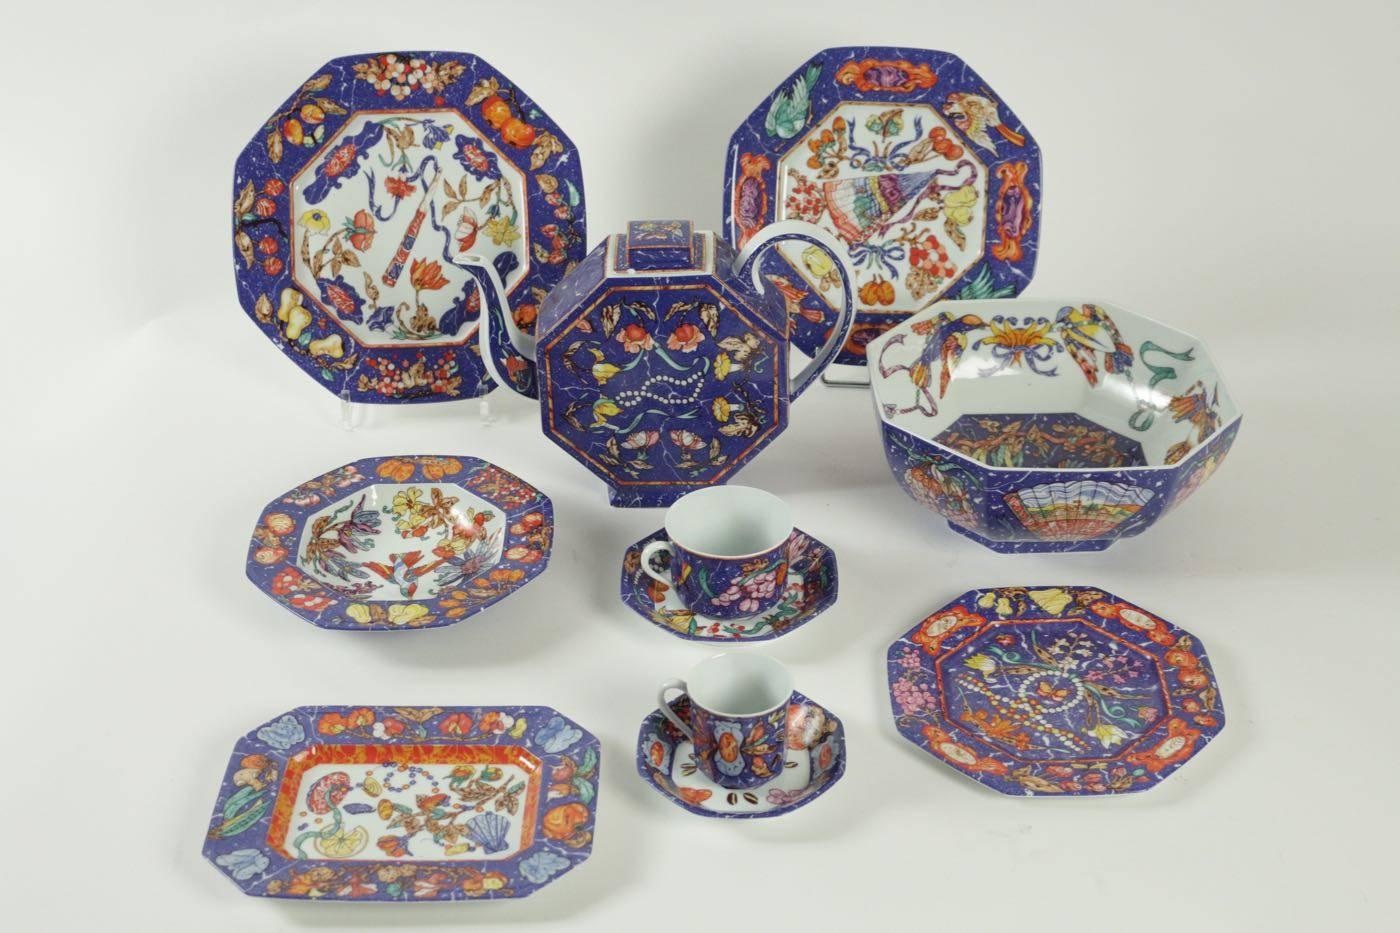 This set comprising
Five large dishes D: 28 Cm
Five soup plates D: 20 cm
Five plates D: 25 cm
Five dessert plates D: 21 cm
Two dishes 22 cm x 18 cm
One large salad bowl diameter 24 cm, high 10 cm

One coffee maker, five cups of coffee and